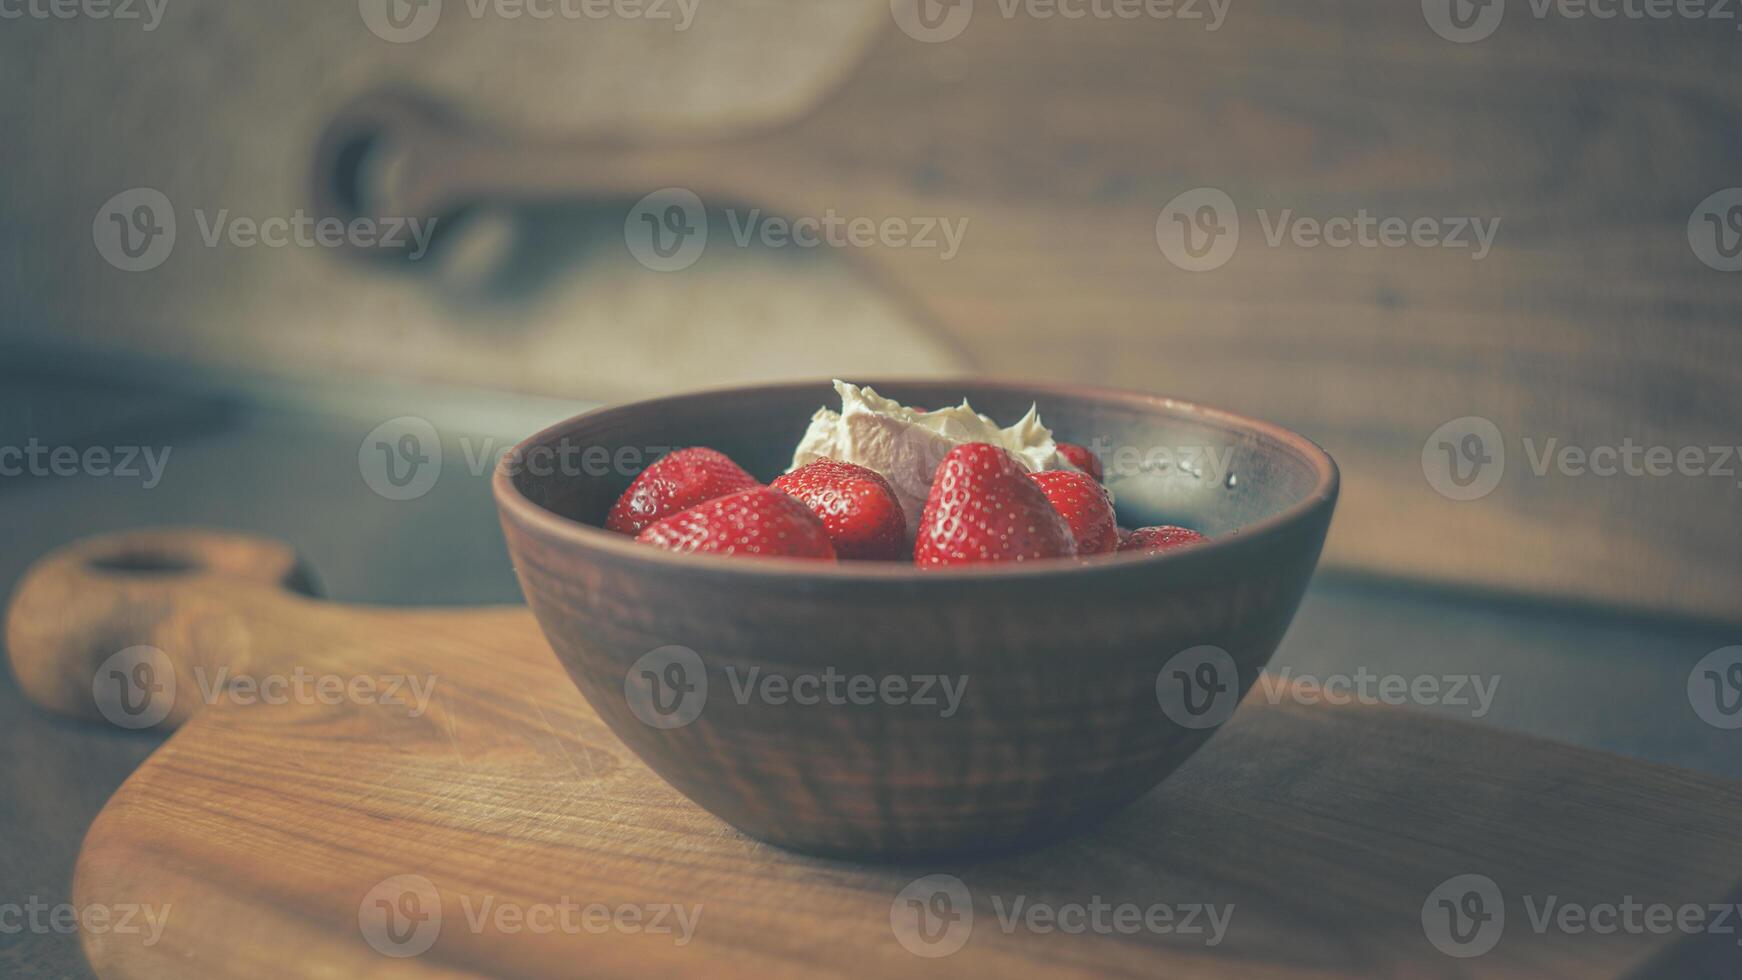 Juicy strawberries with cream in a clay plate on a wooden board. POSTER 16-9 photo